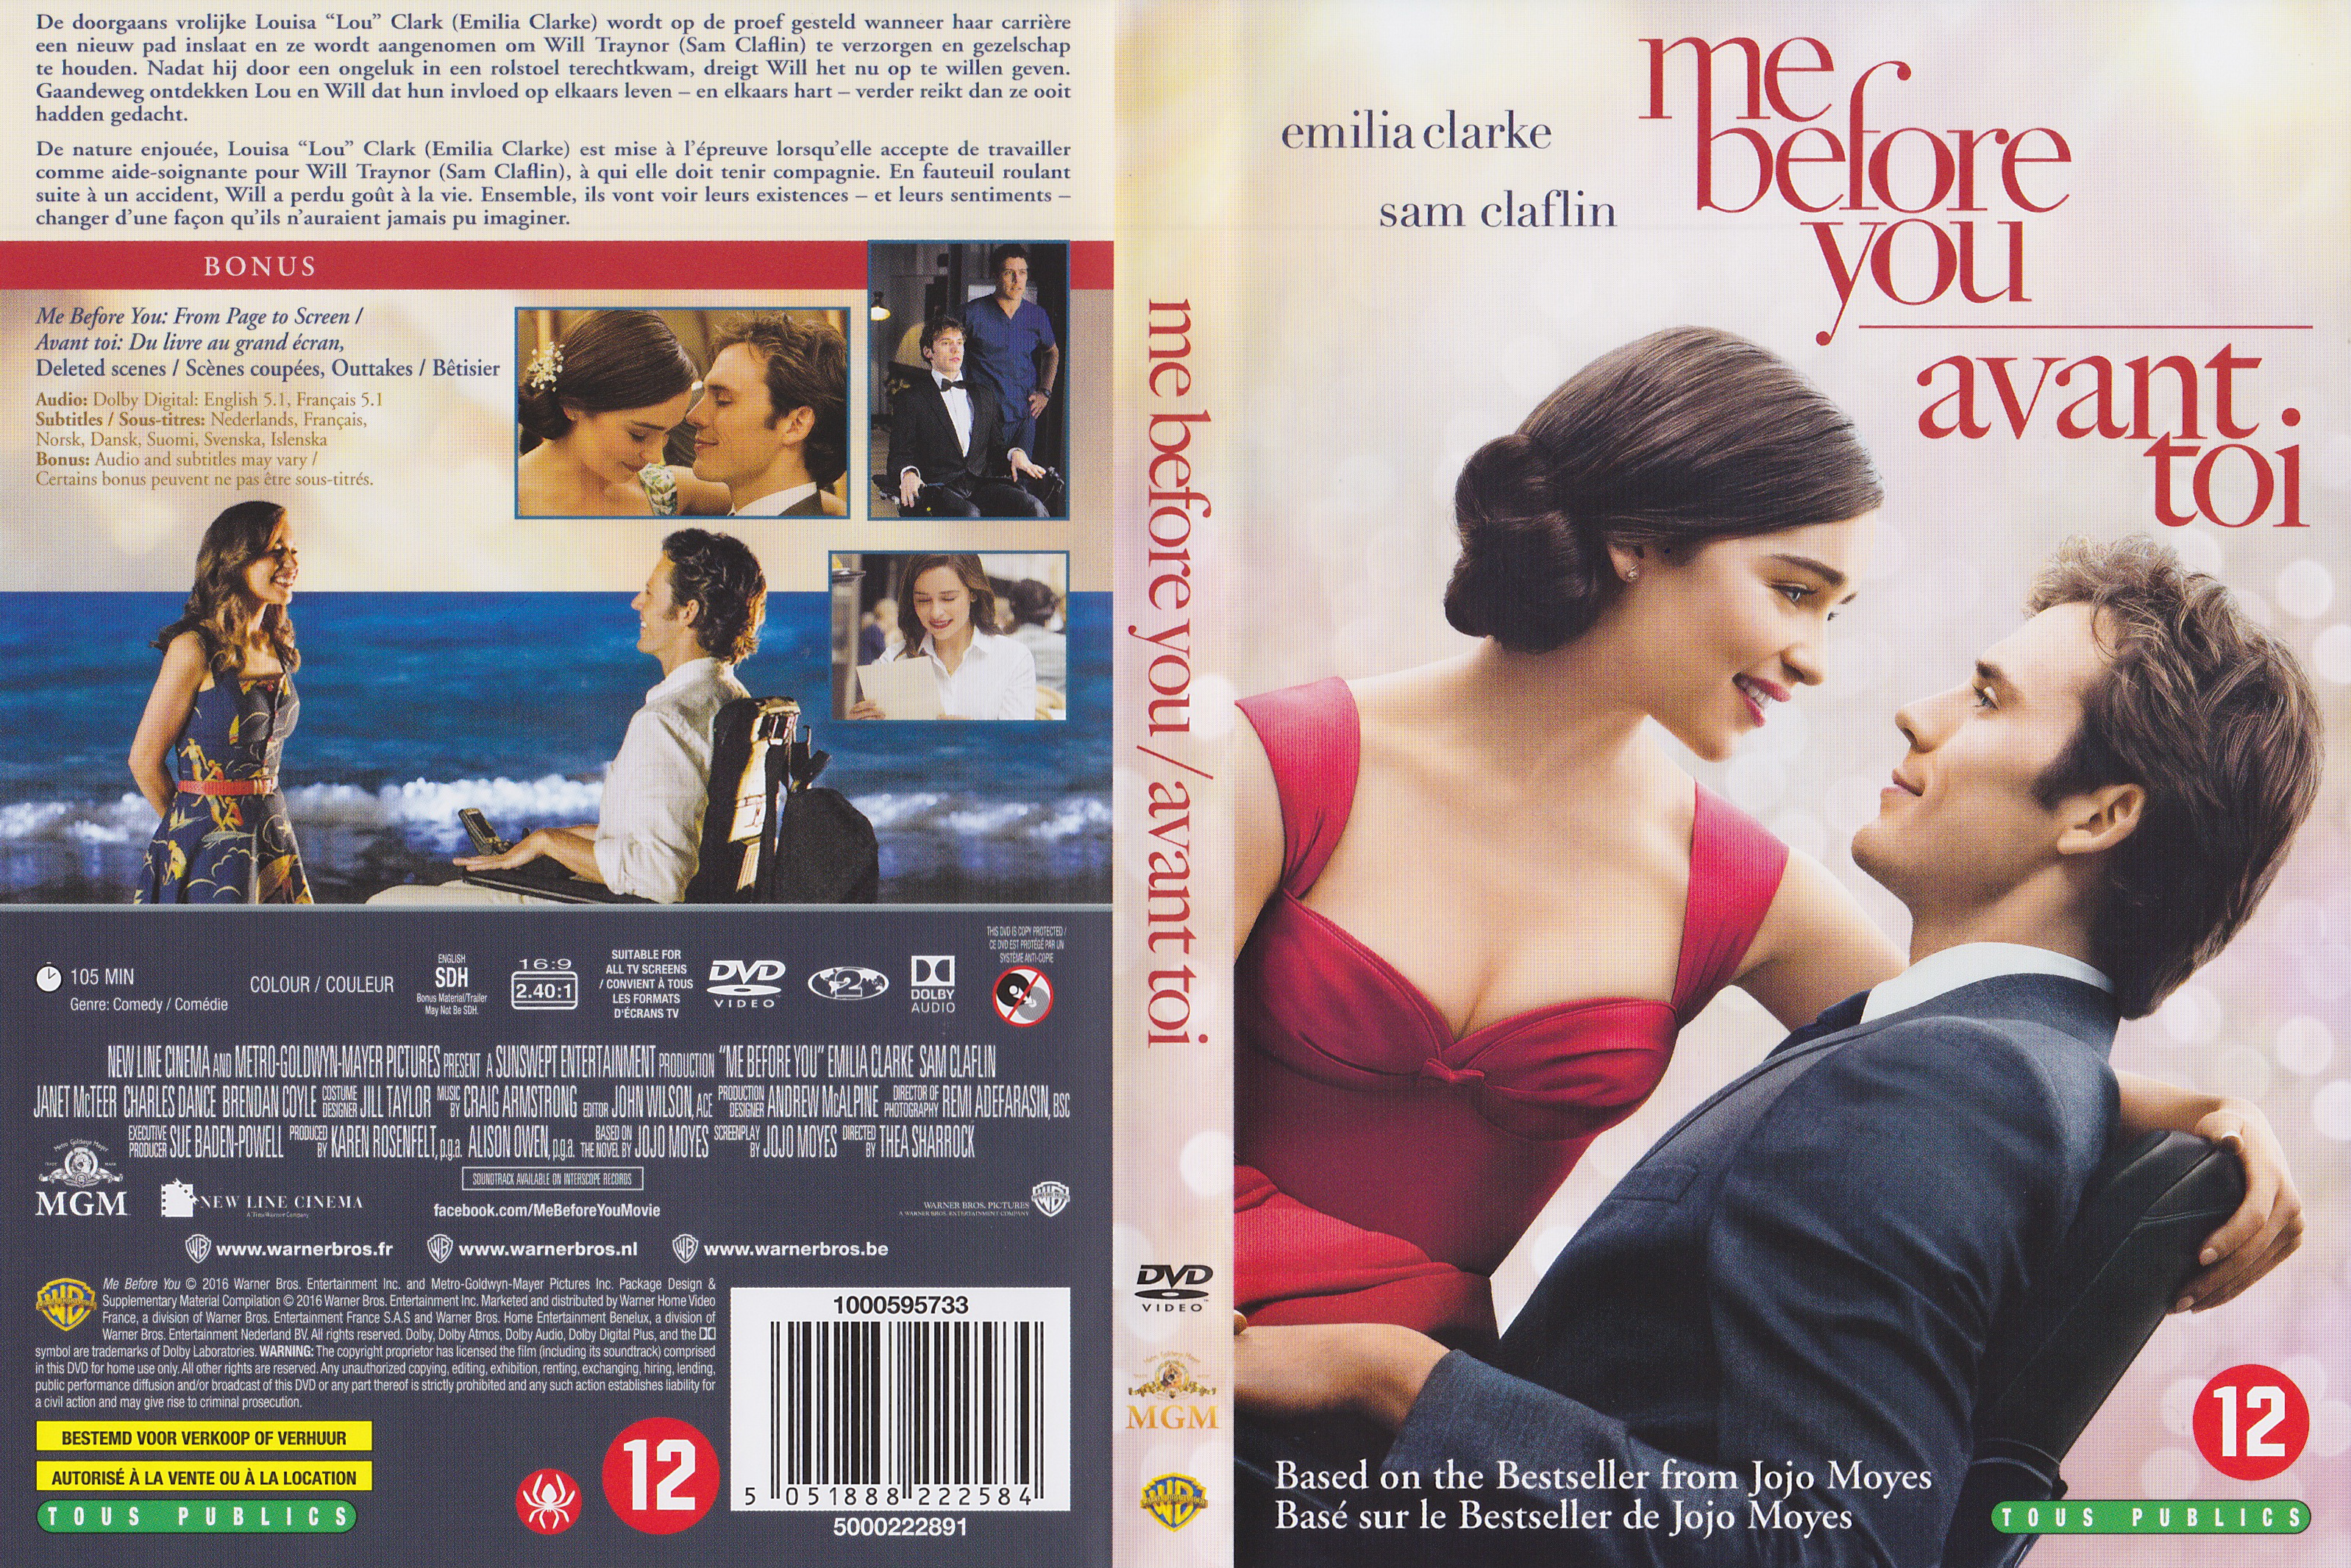 Jaquette DVD Me before you - avant toi